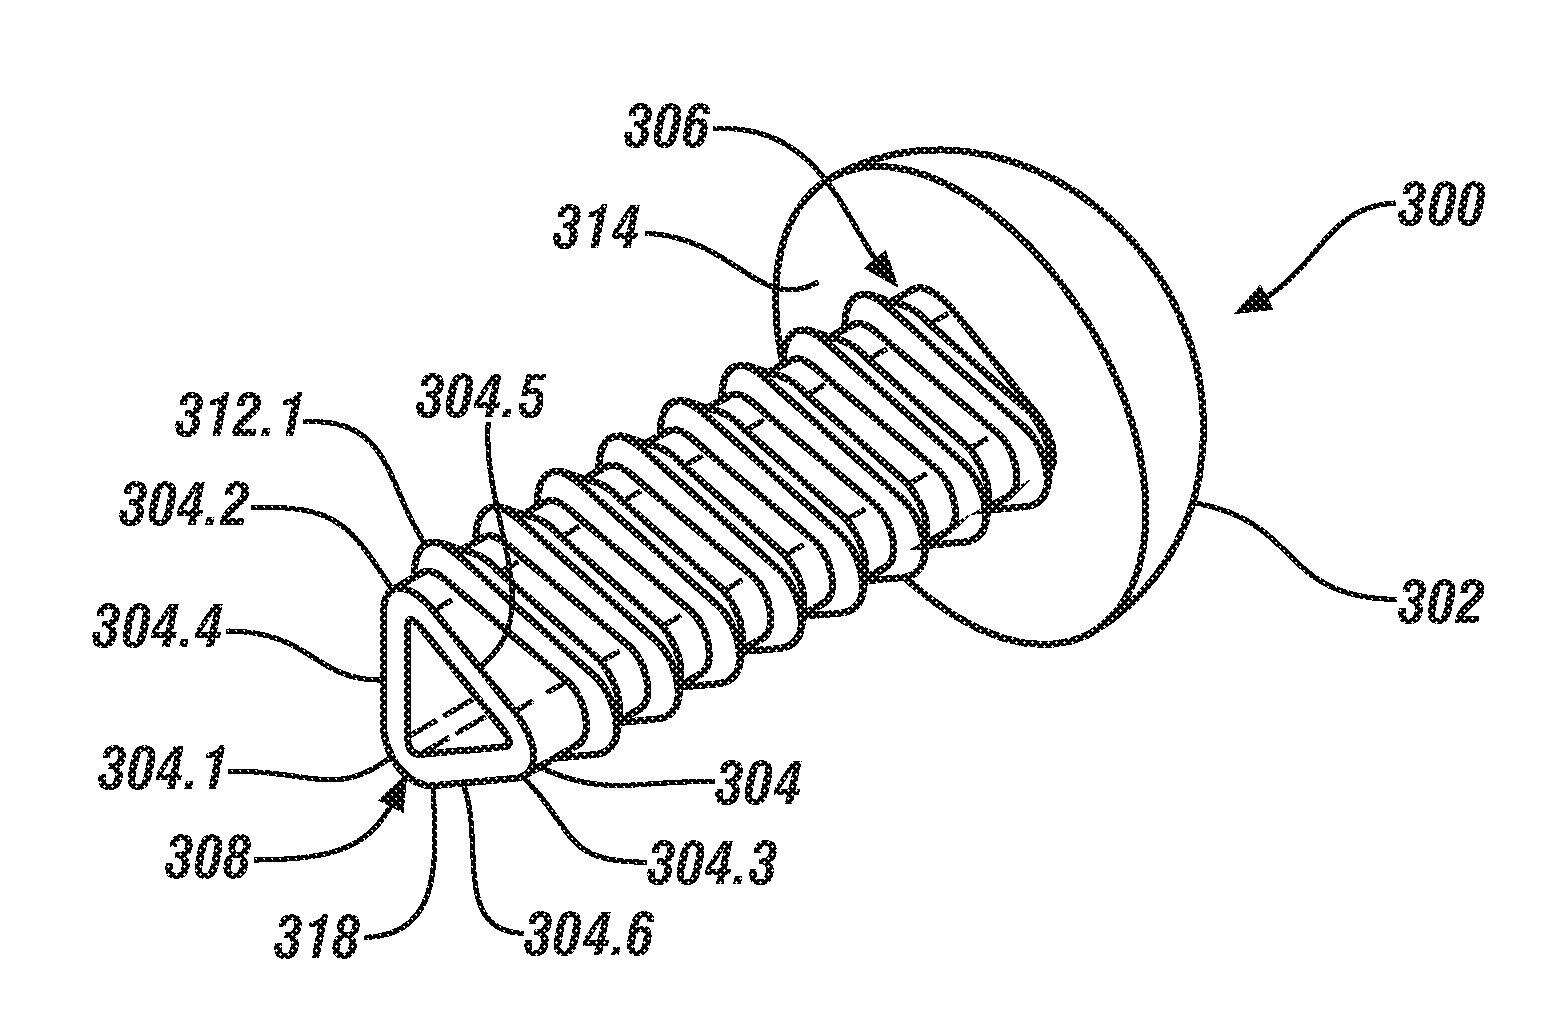 Elastically deformable alignment fastener and system